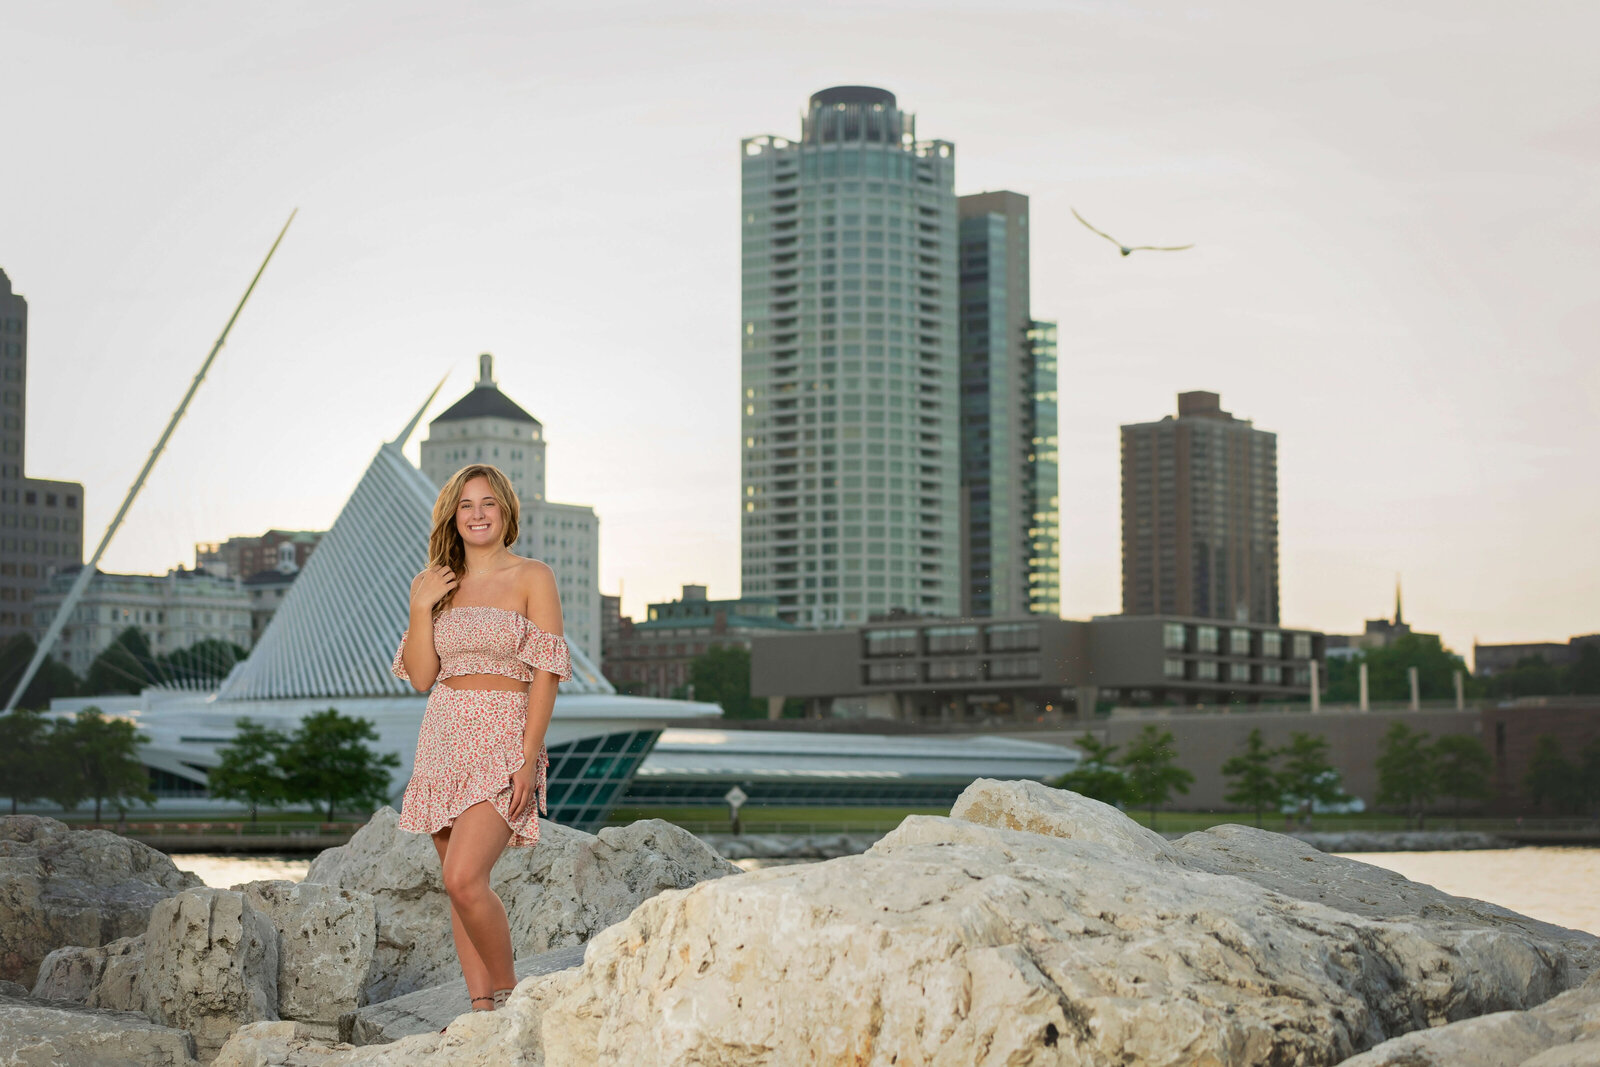 Senior-Pictures-Downtown-MKE-Wisconsin-62